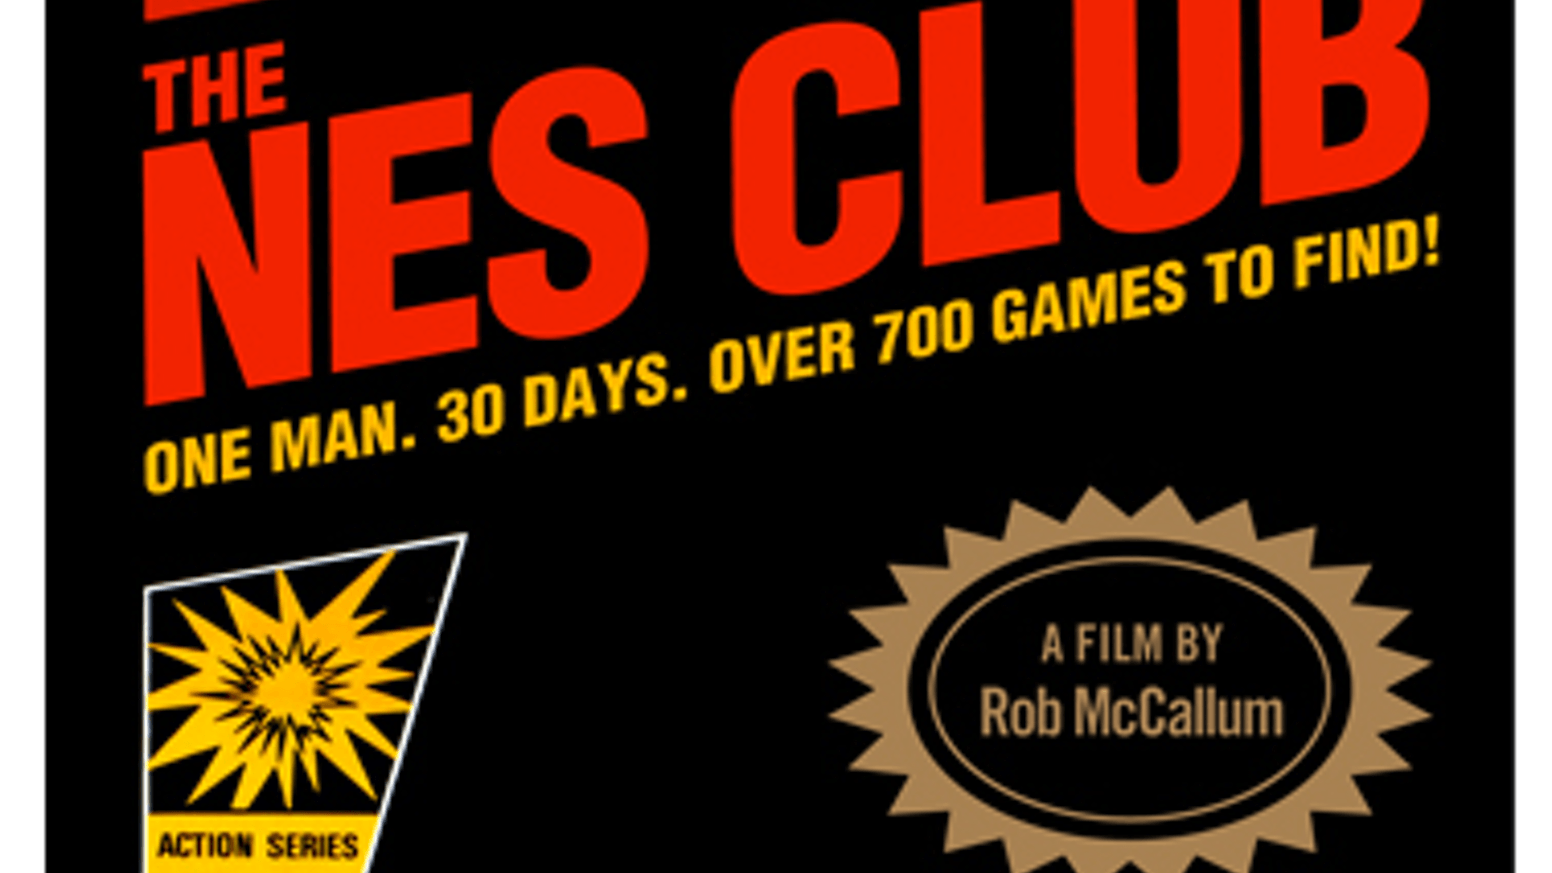 Google Plus in 8 Bit Logo - The NES Club: One Man • 30 Days • Over 700 Games To FIND!